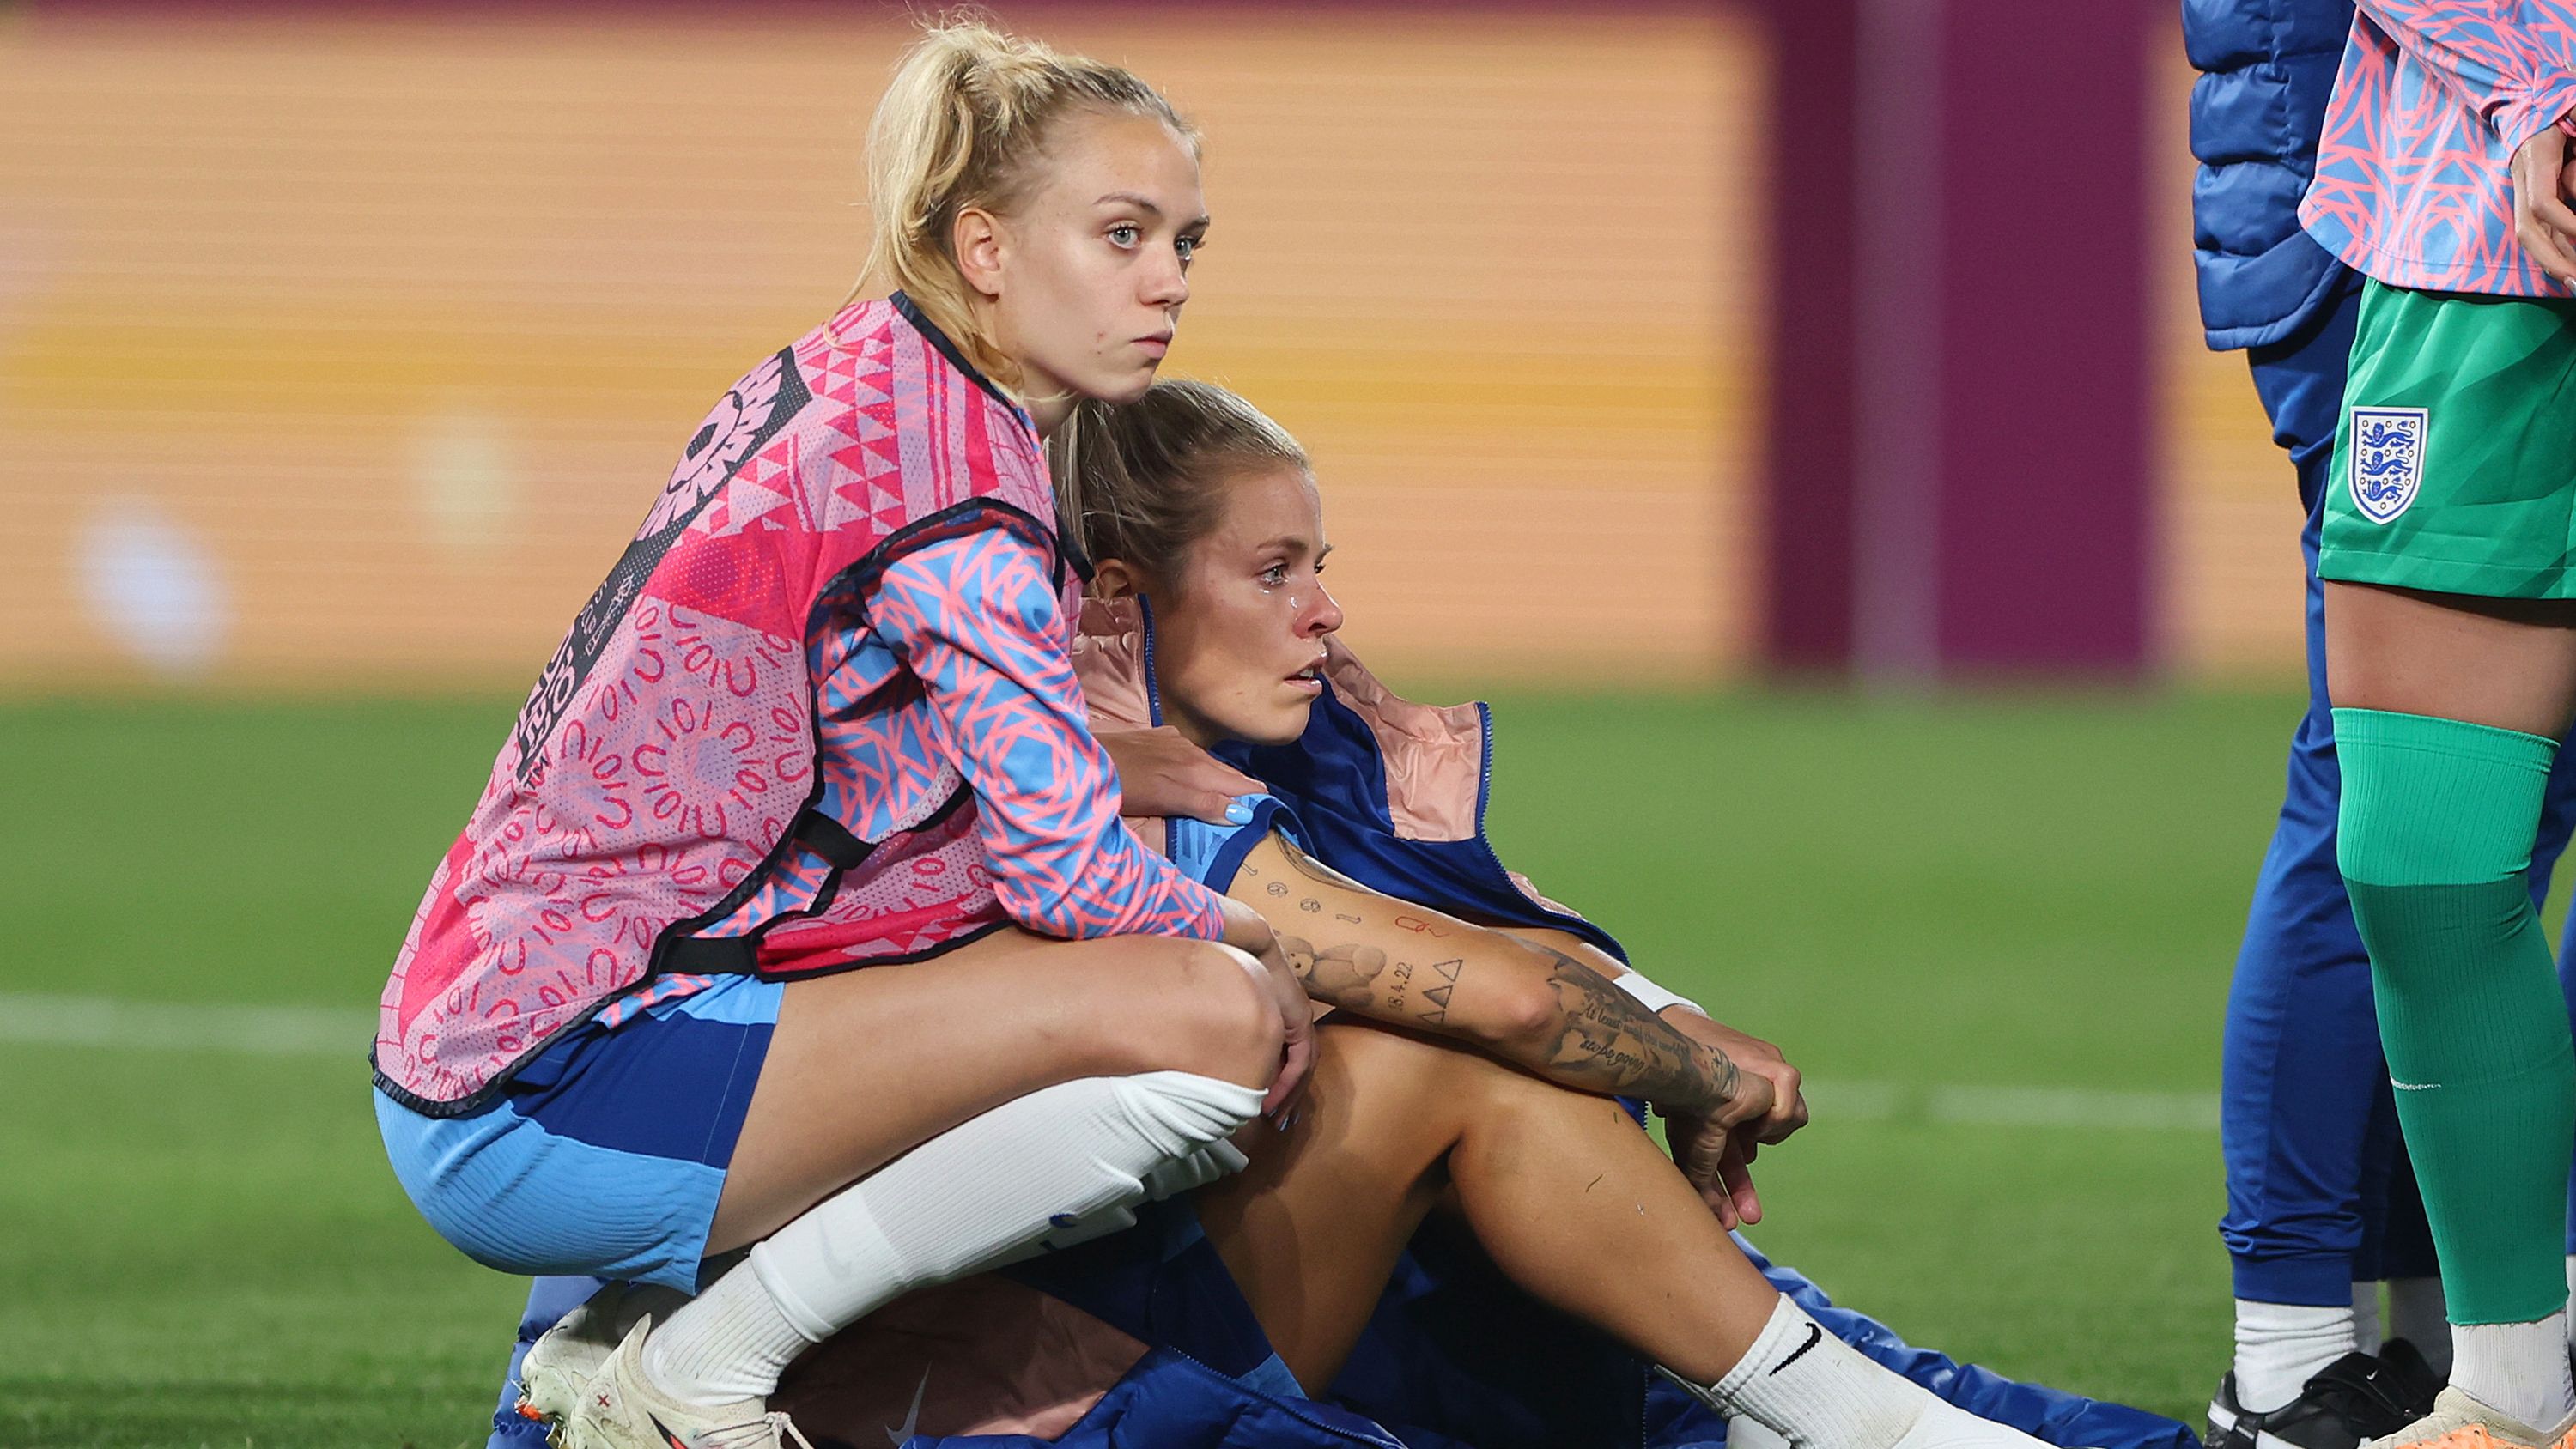 'It's devastating': England stars 'heartbroken' as country's World Cup drought rolls on